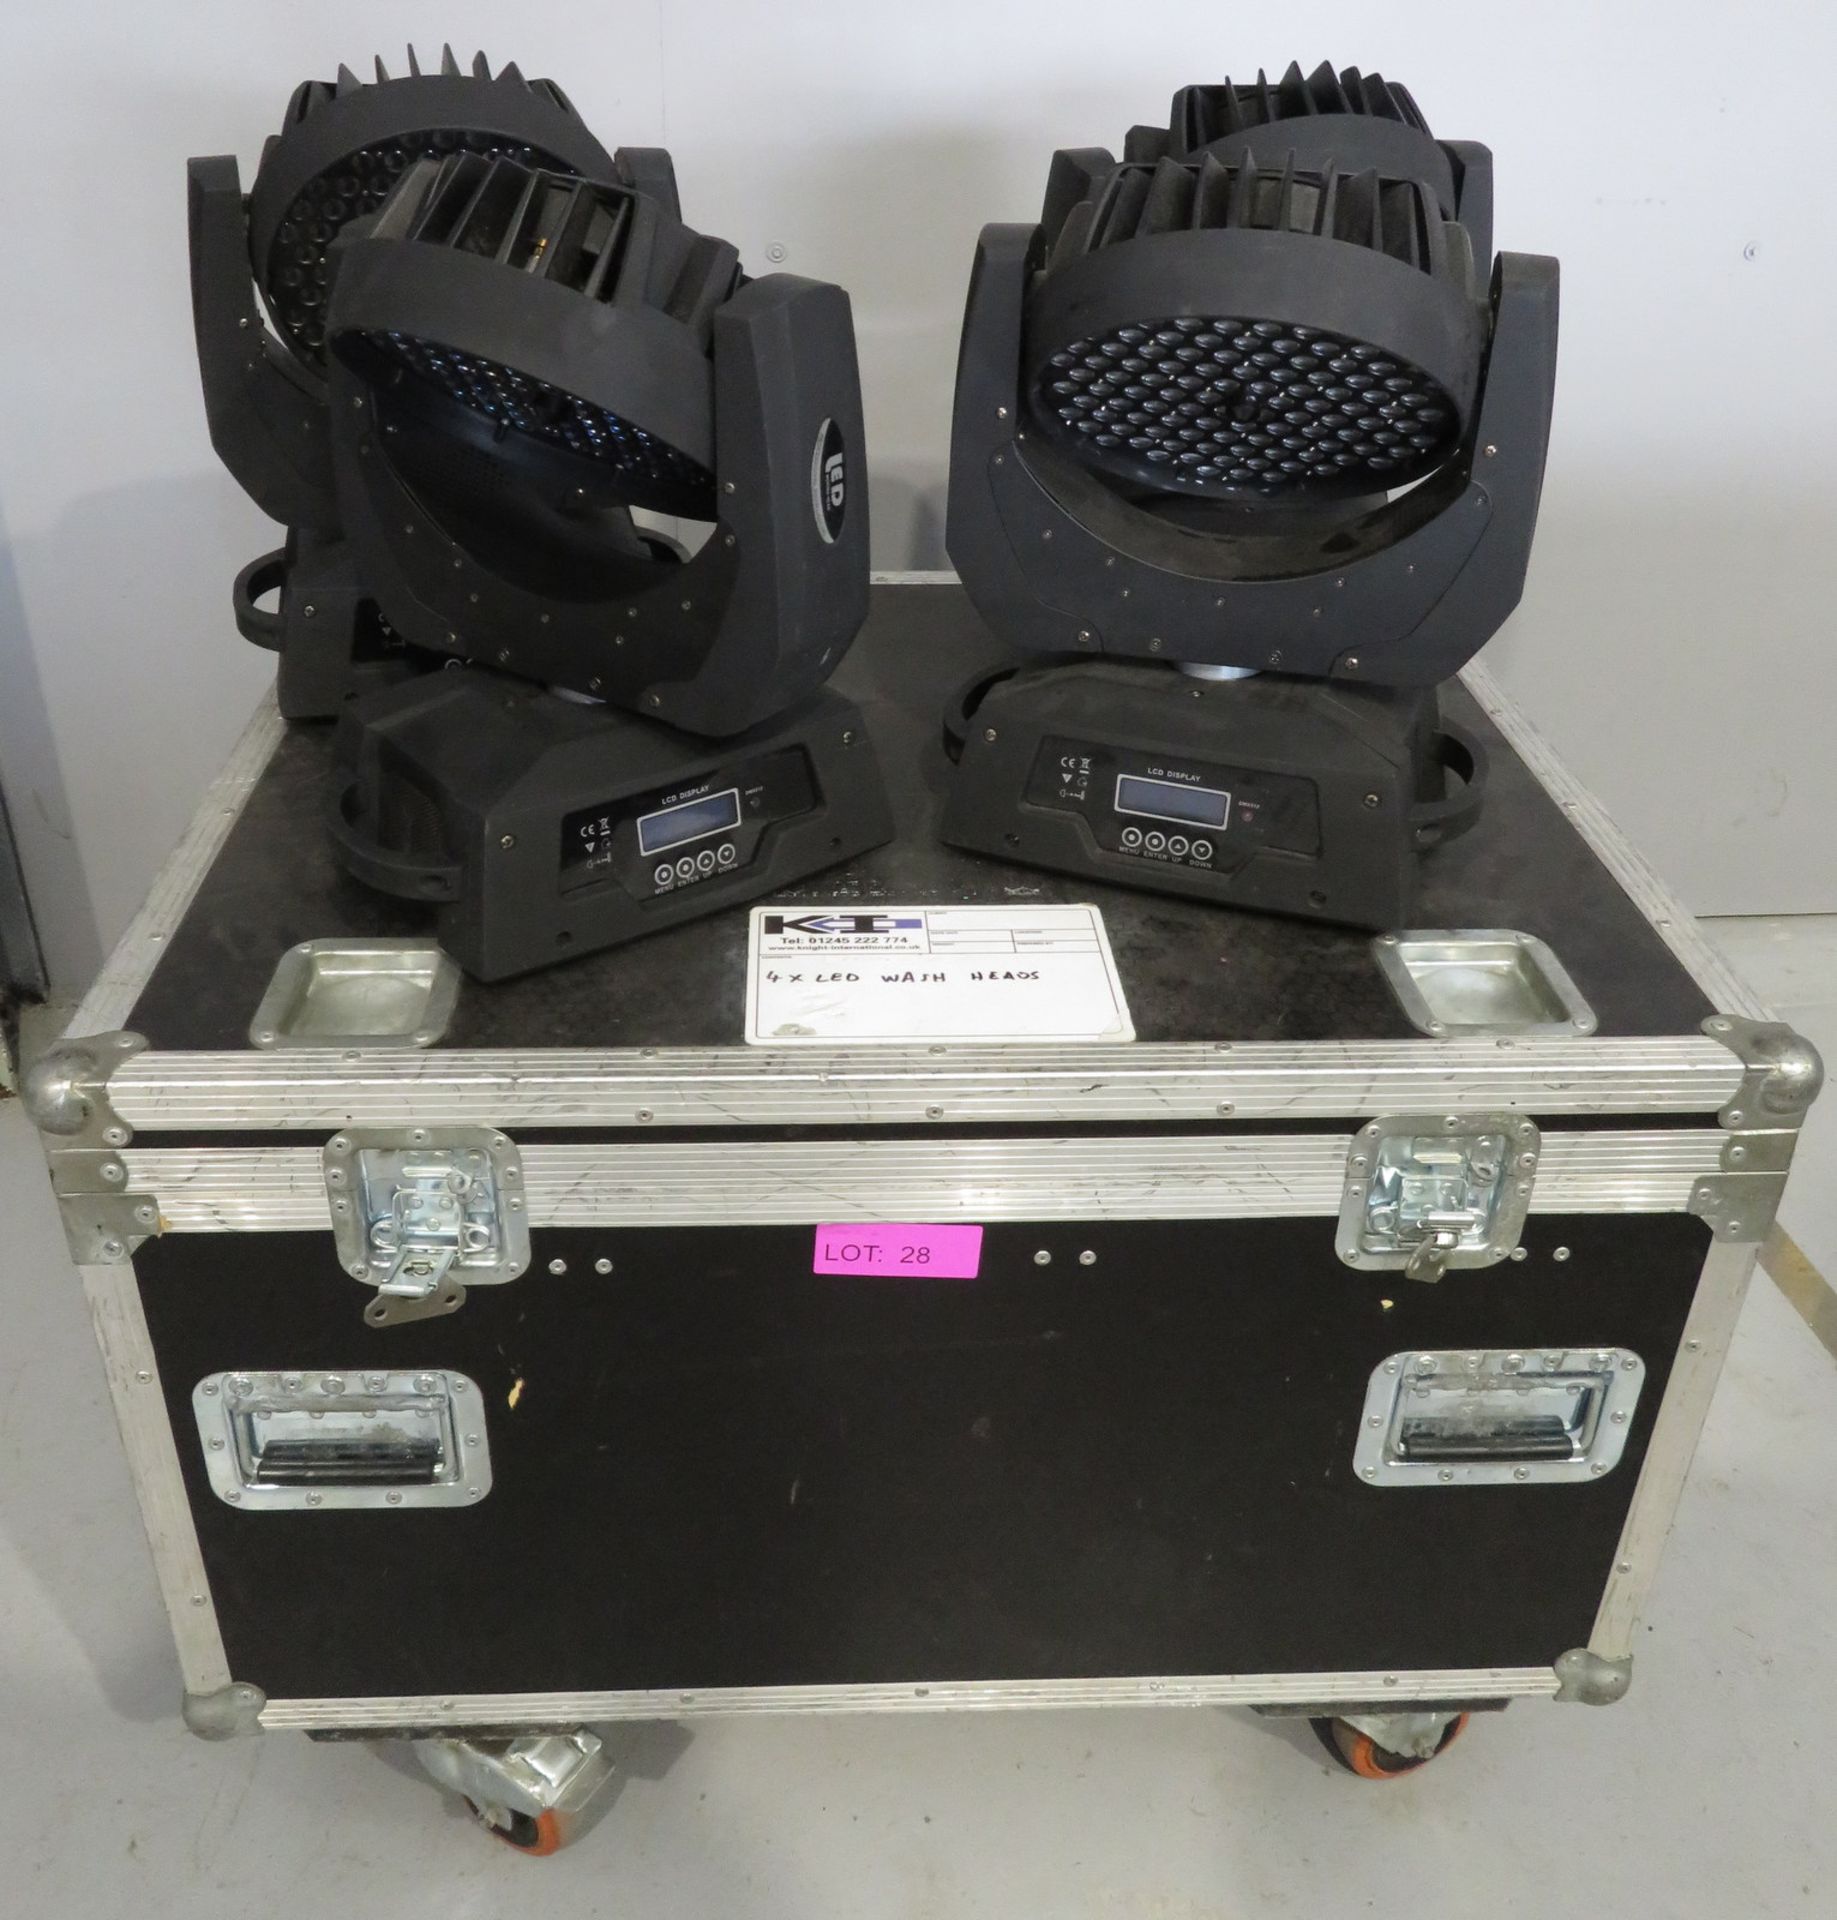 4x LED Moving head wash's in flightcase. Includes clamps but no power cables. Working Cond